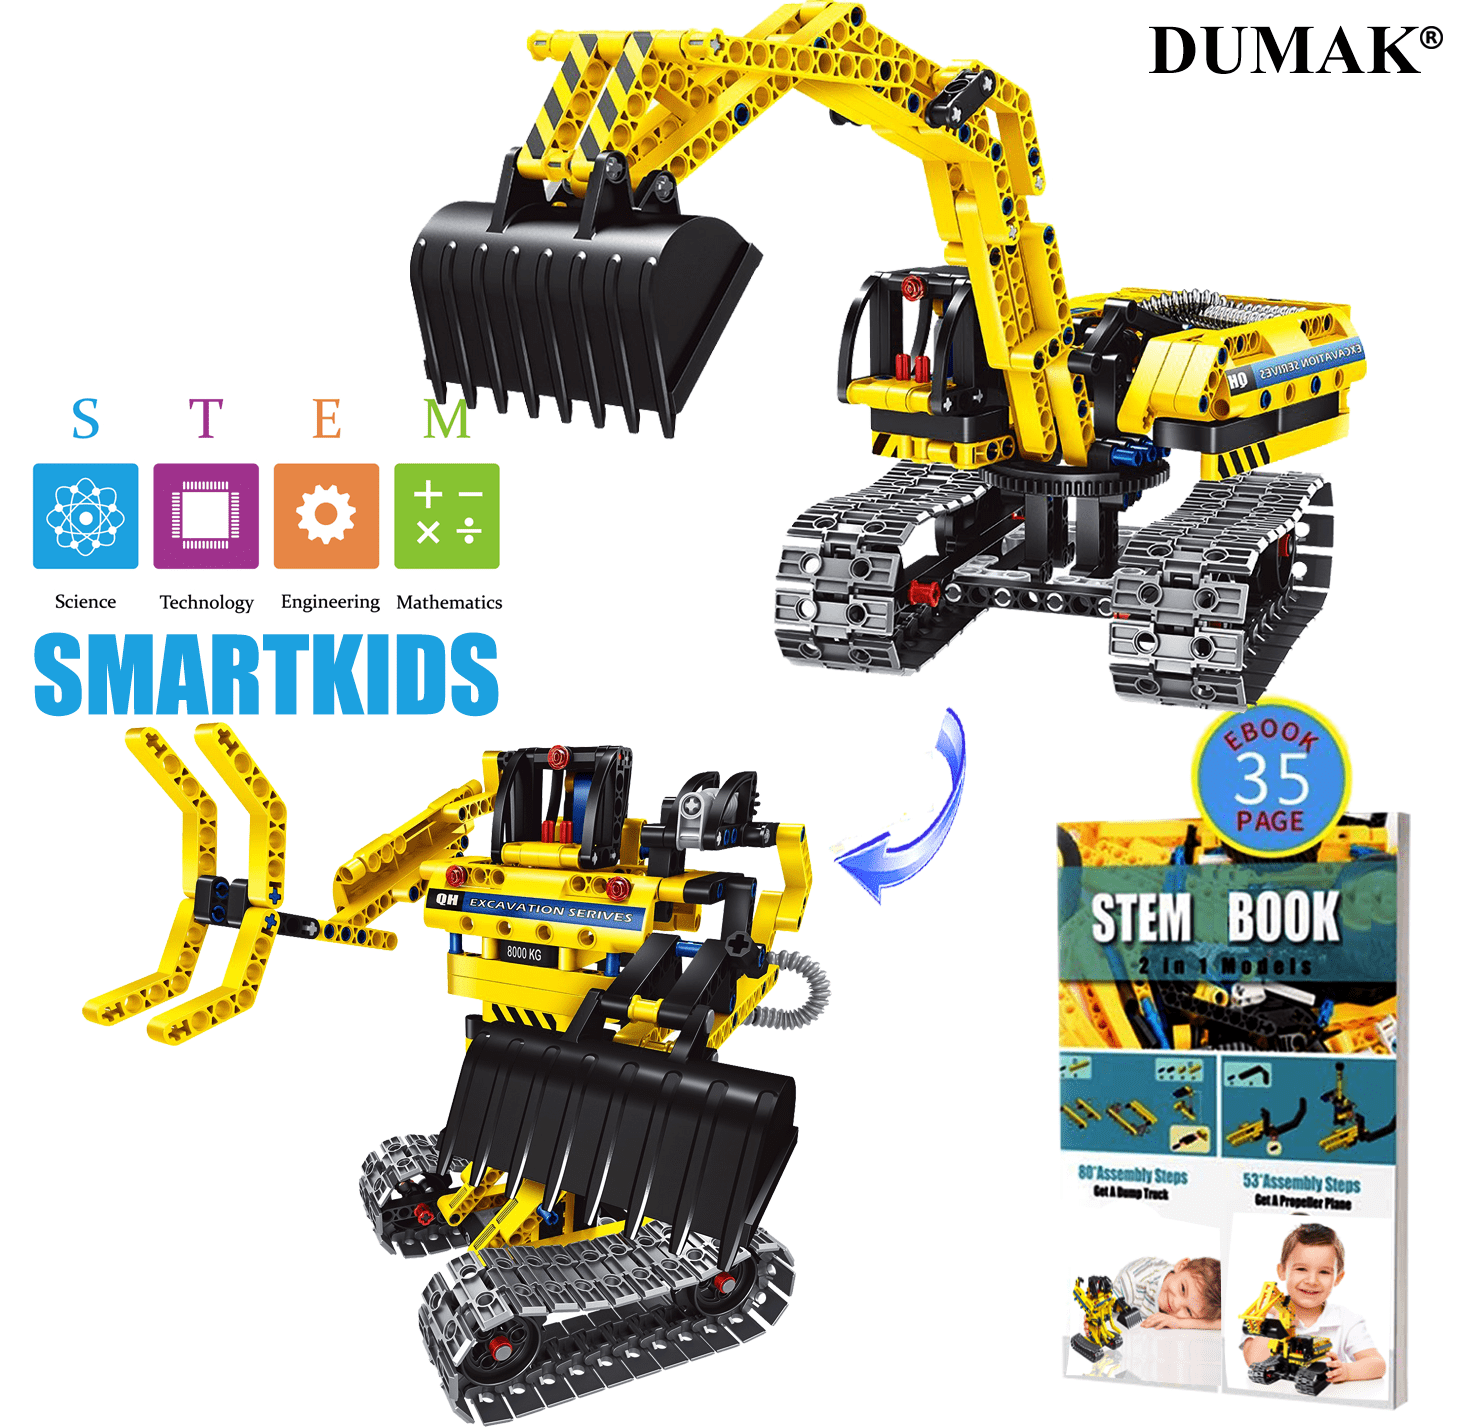 TRUCK DIGGER CONSTRUCTION PUZZLE BRICK BLOCK TOY BUILD YOUR OWN BUILDING KID FUN 